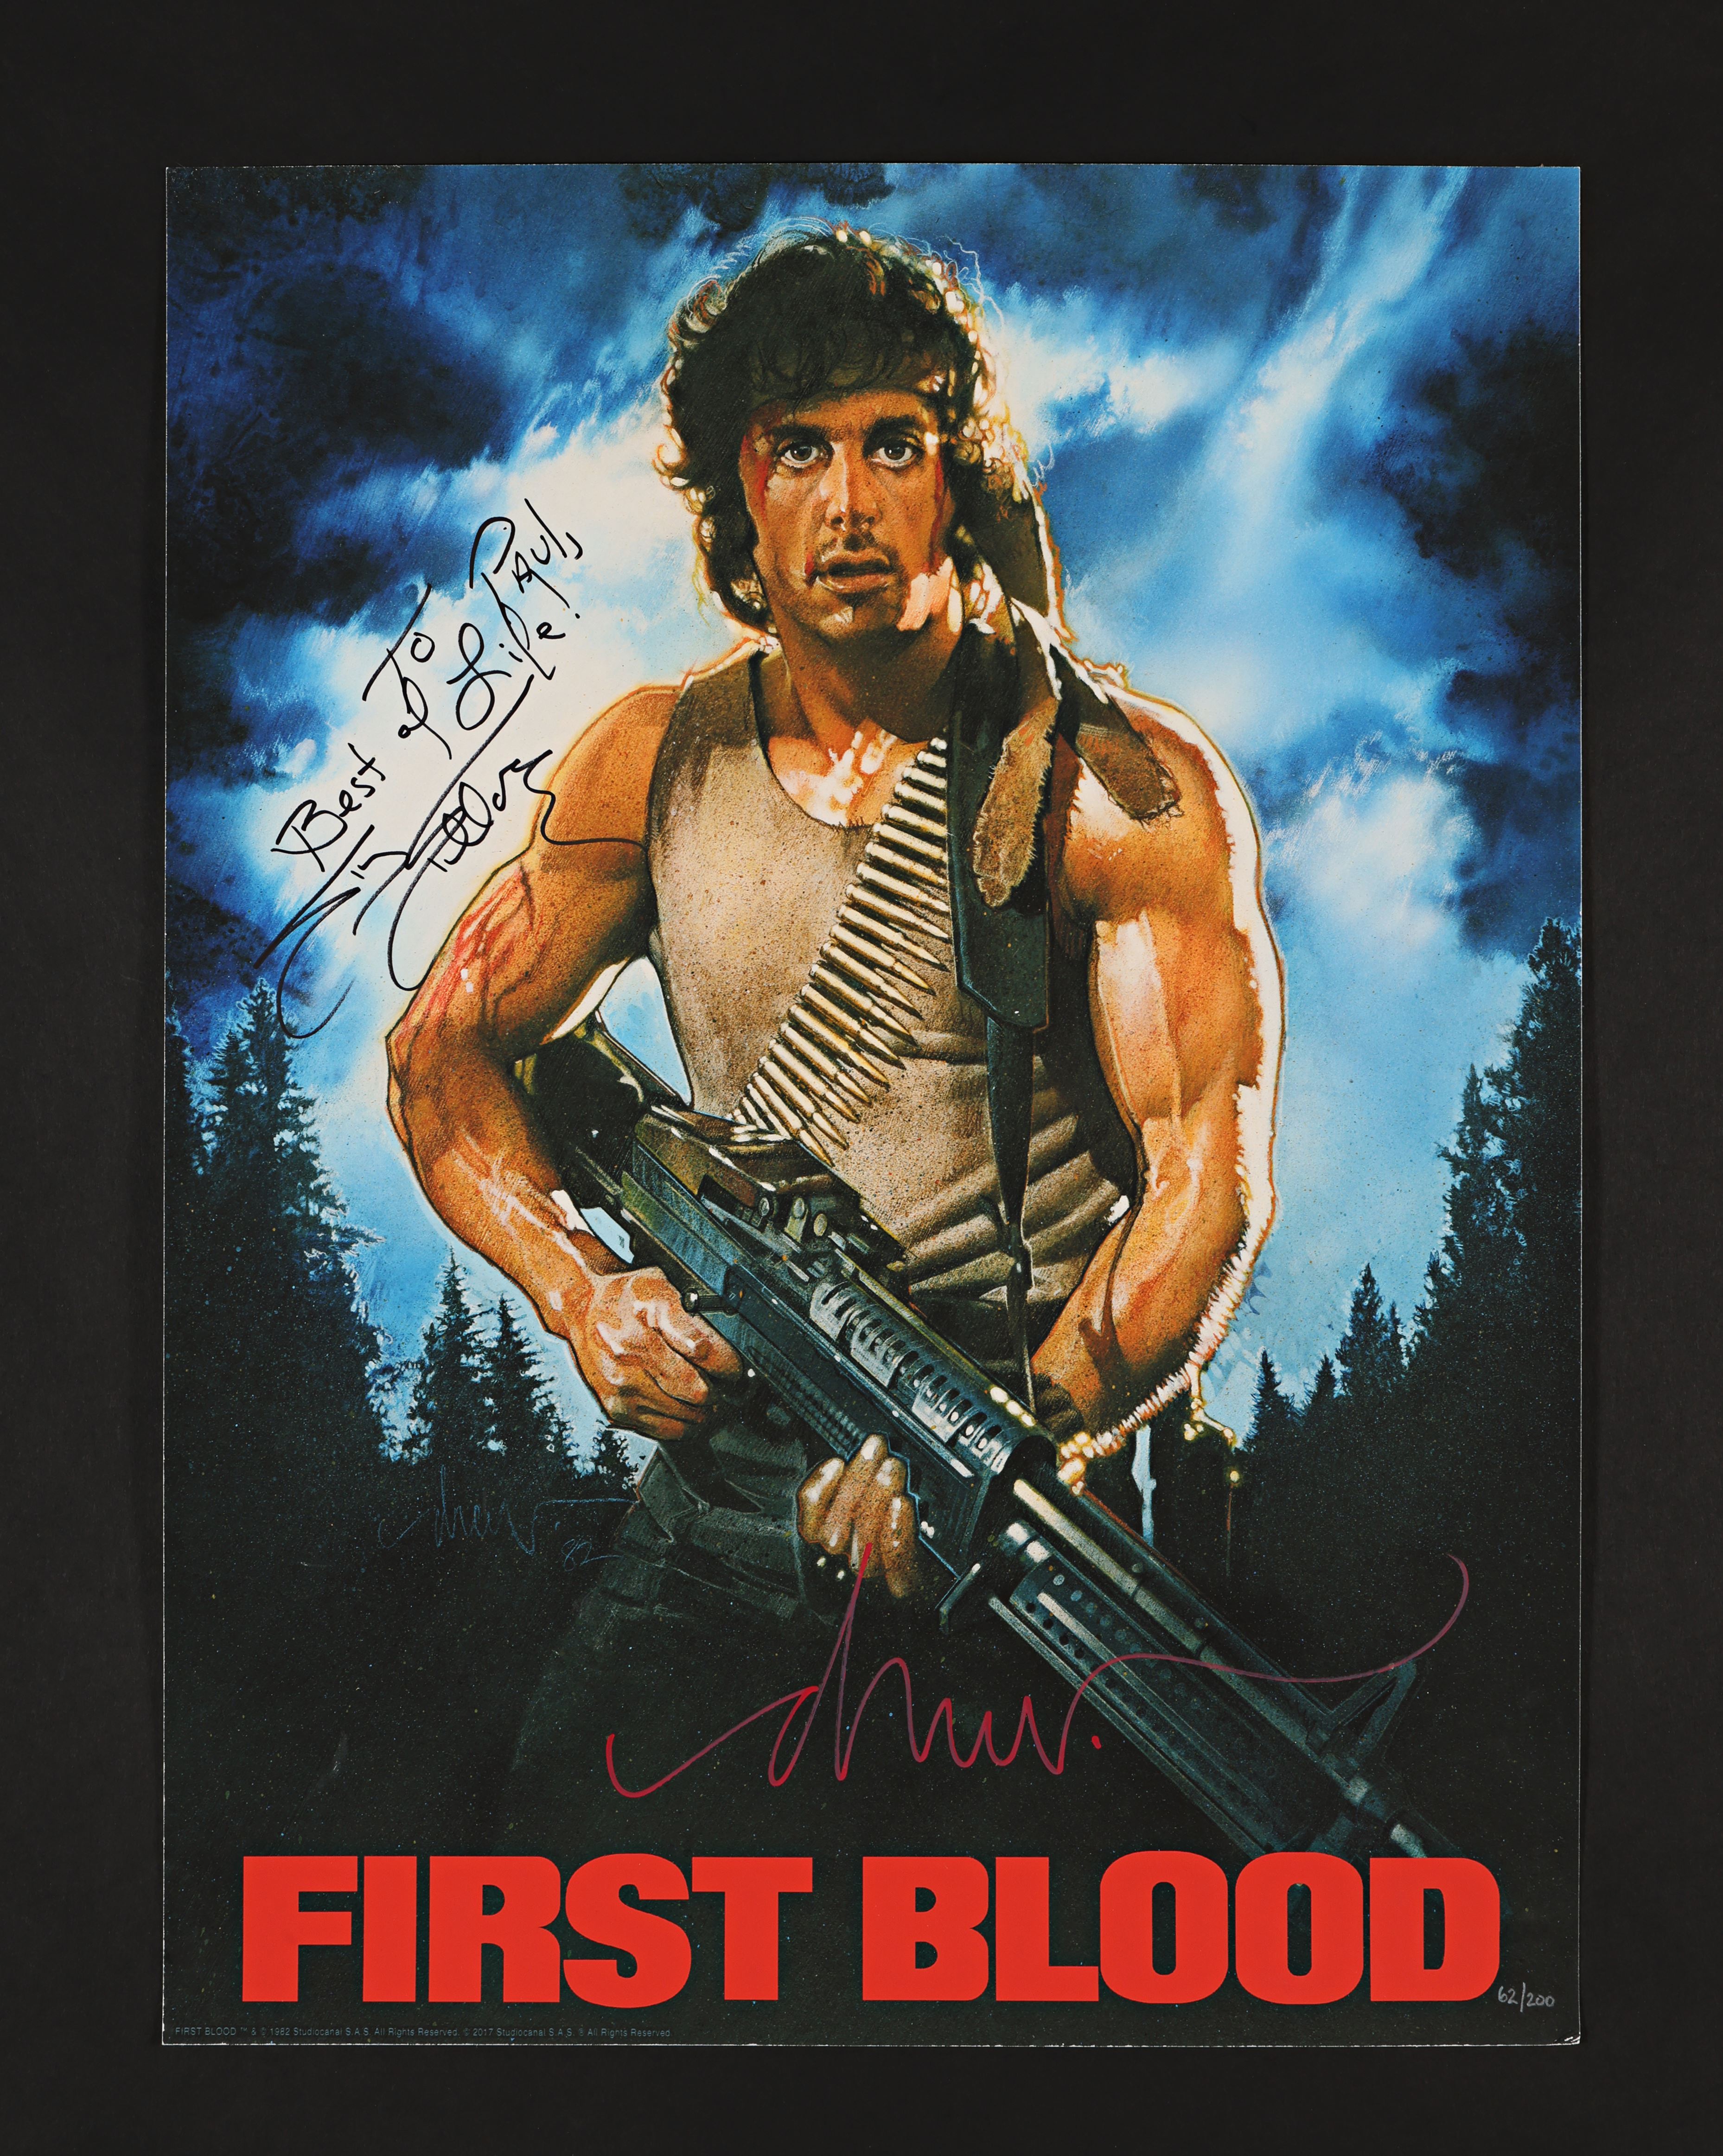 RAMBO: FIRST BLOOD (1982) - Sylvester Stallone and Drew Struzan Autographed Limited Edition Title Ed